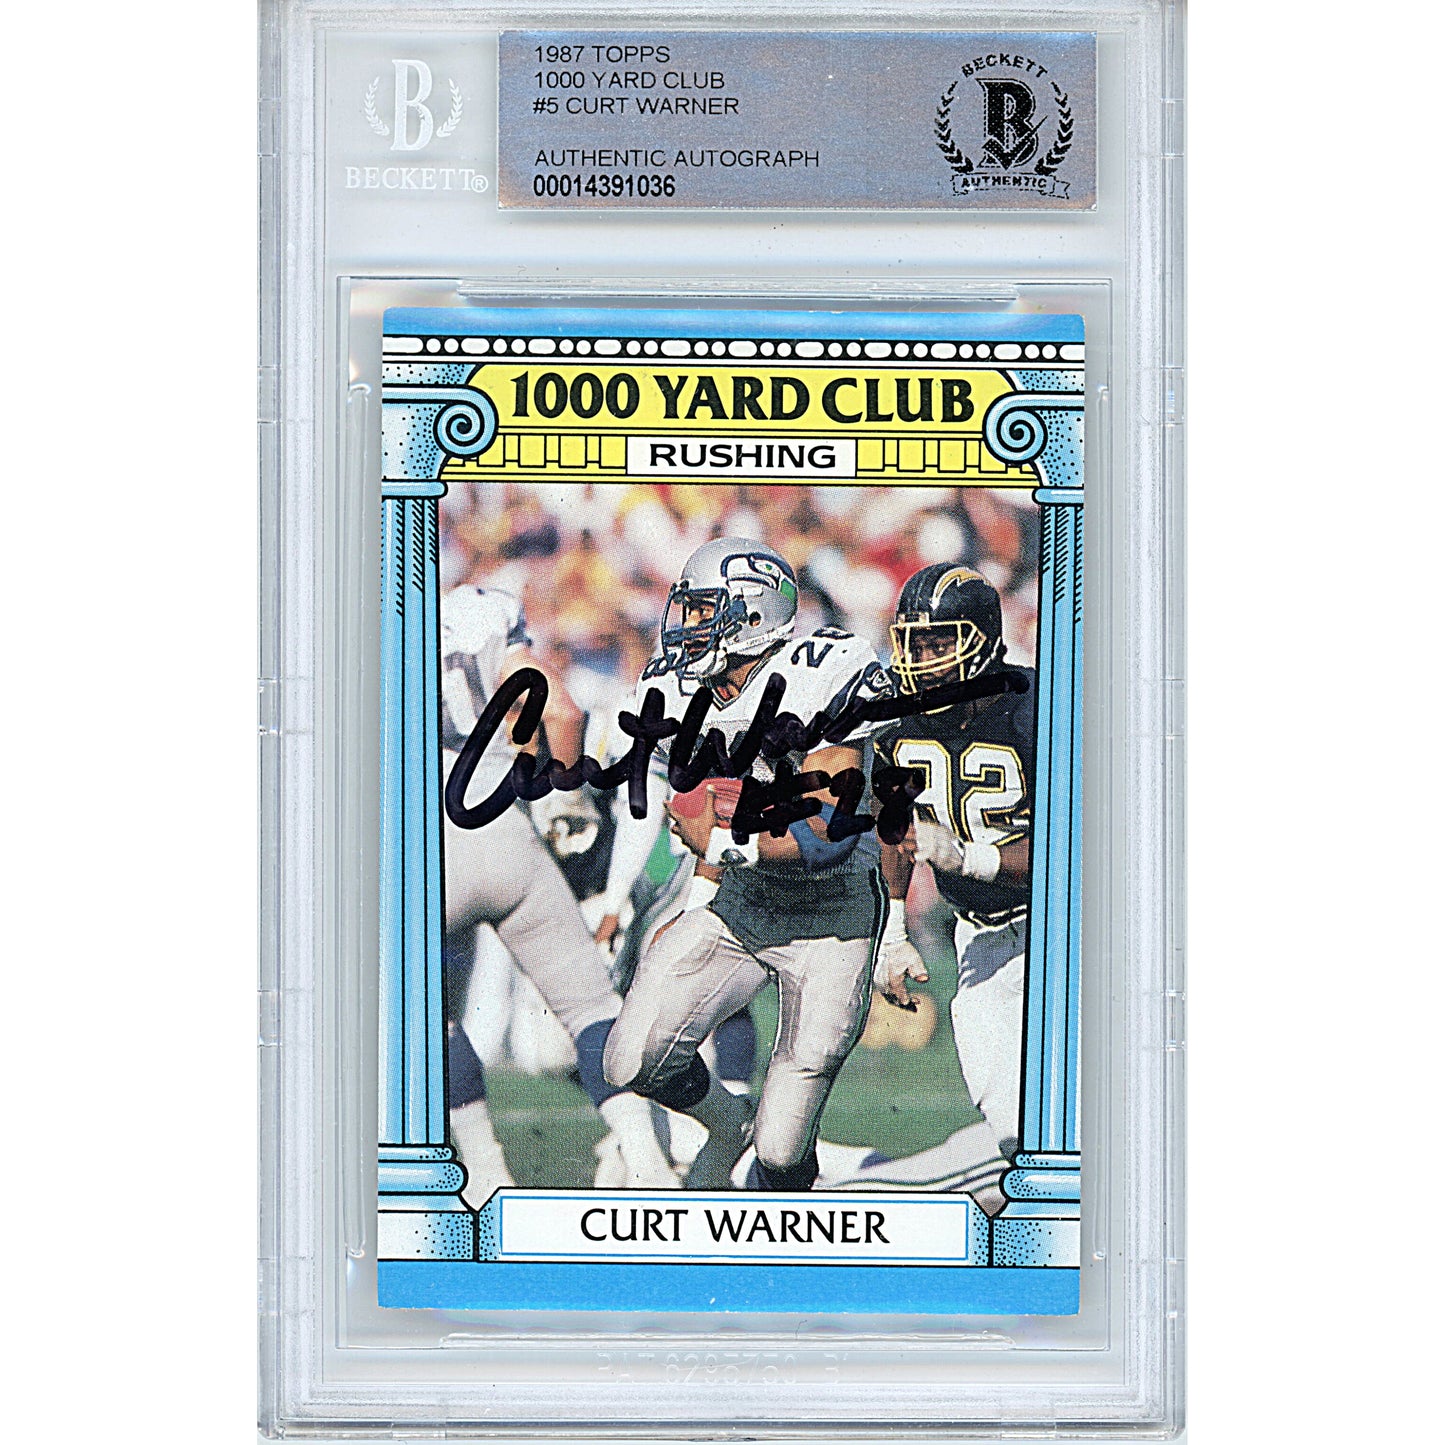 Footballs- Autographed- Curt Warner Signed Seattle Seahawks 1987 Topps 1000 Yard Club Football Card Beckett Authentic Slabbed 00014391036 - 101